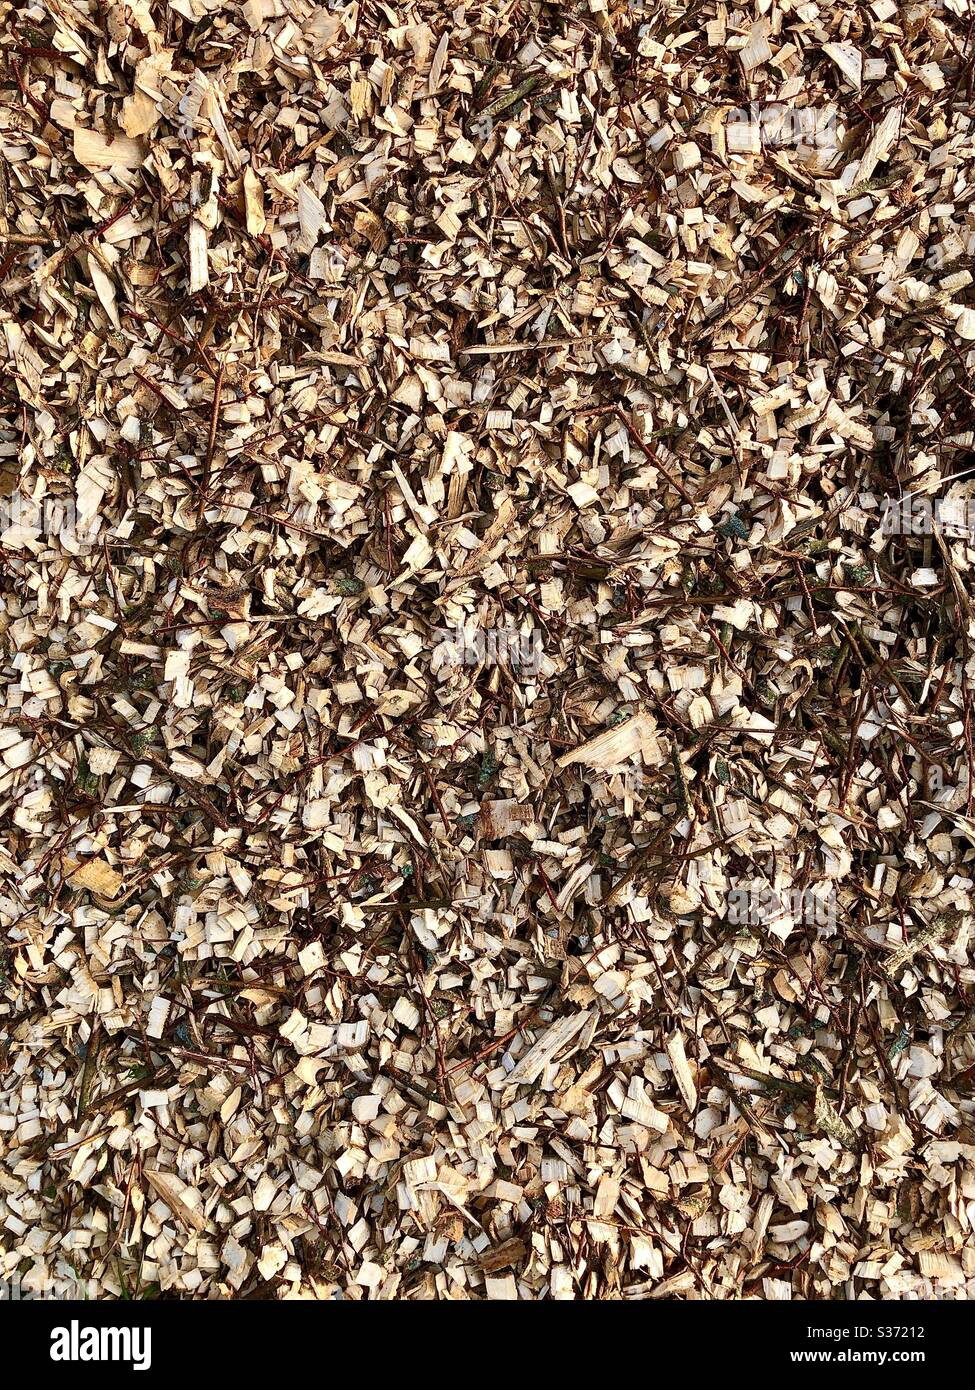 Fine wood chippings for covering garden soil beds. Stock Photo